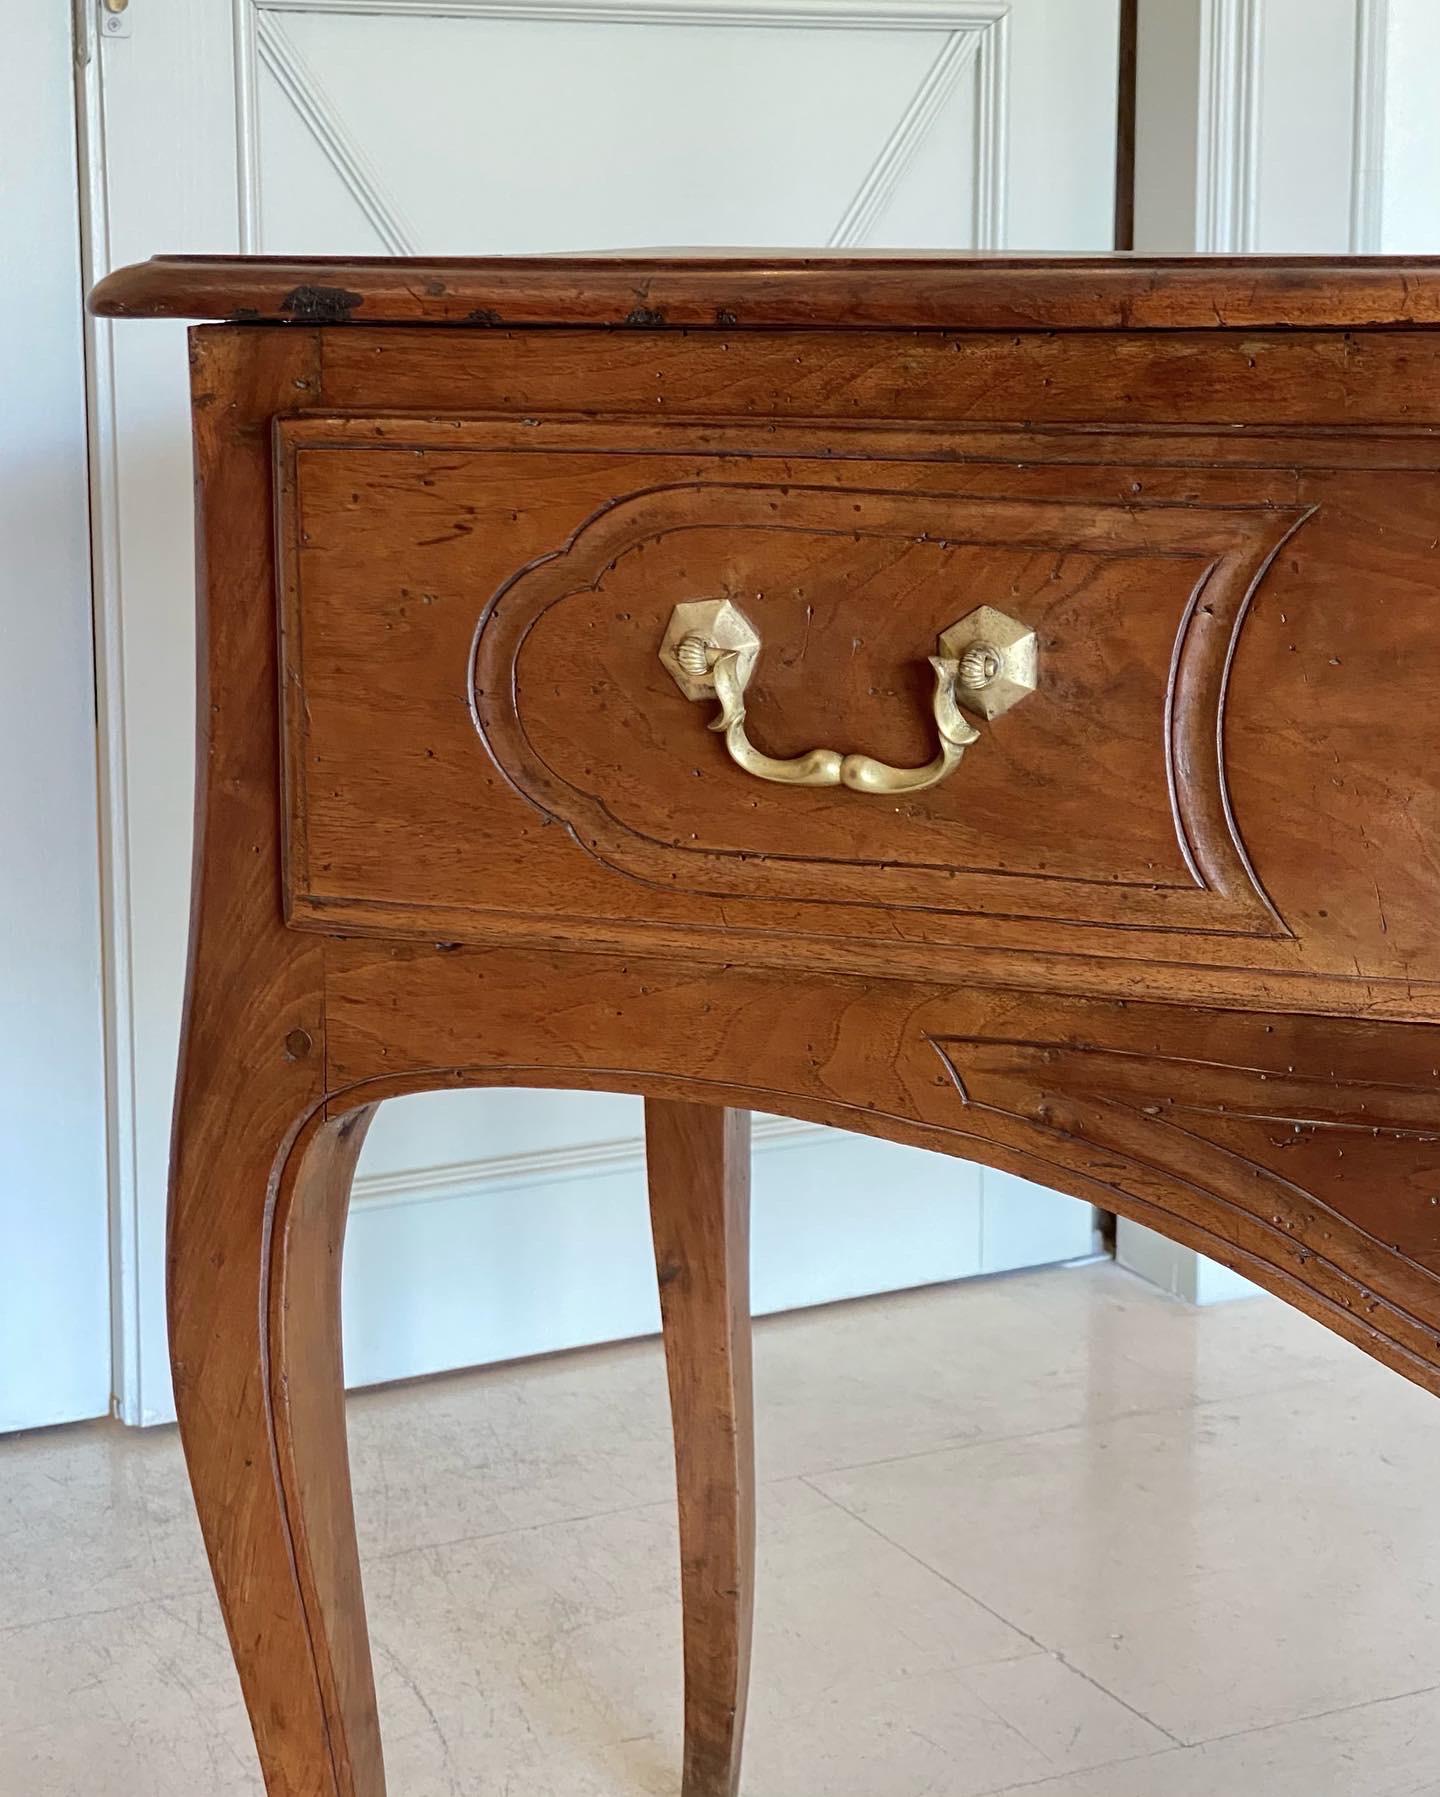 Gilt Italian Mid-18th Century Walnut Console Table with Drawer For Sale